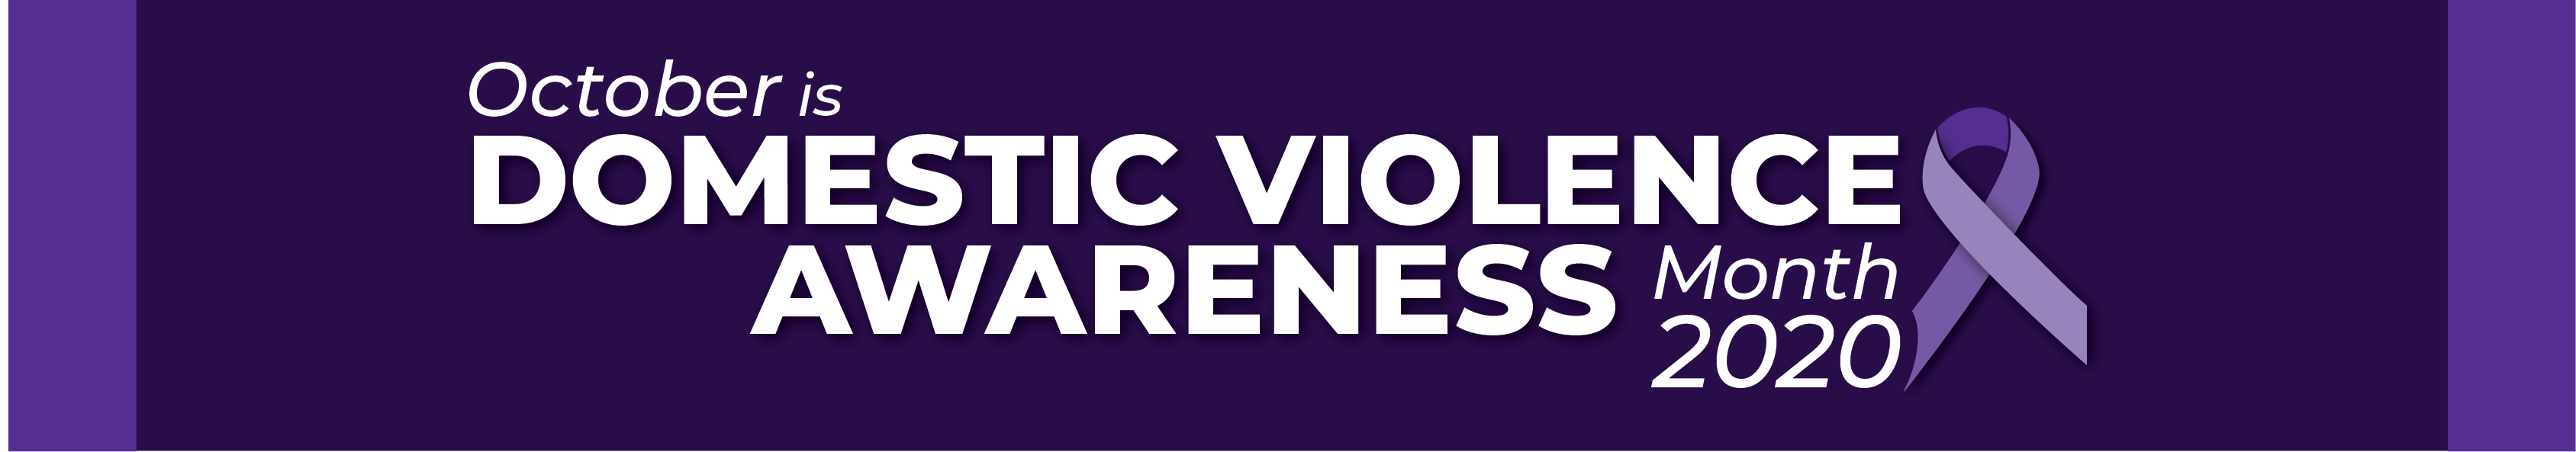 October is Domestic Violence Awareness Month 2020 graphic